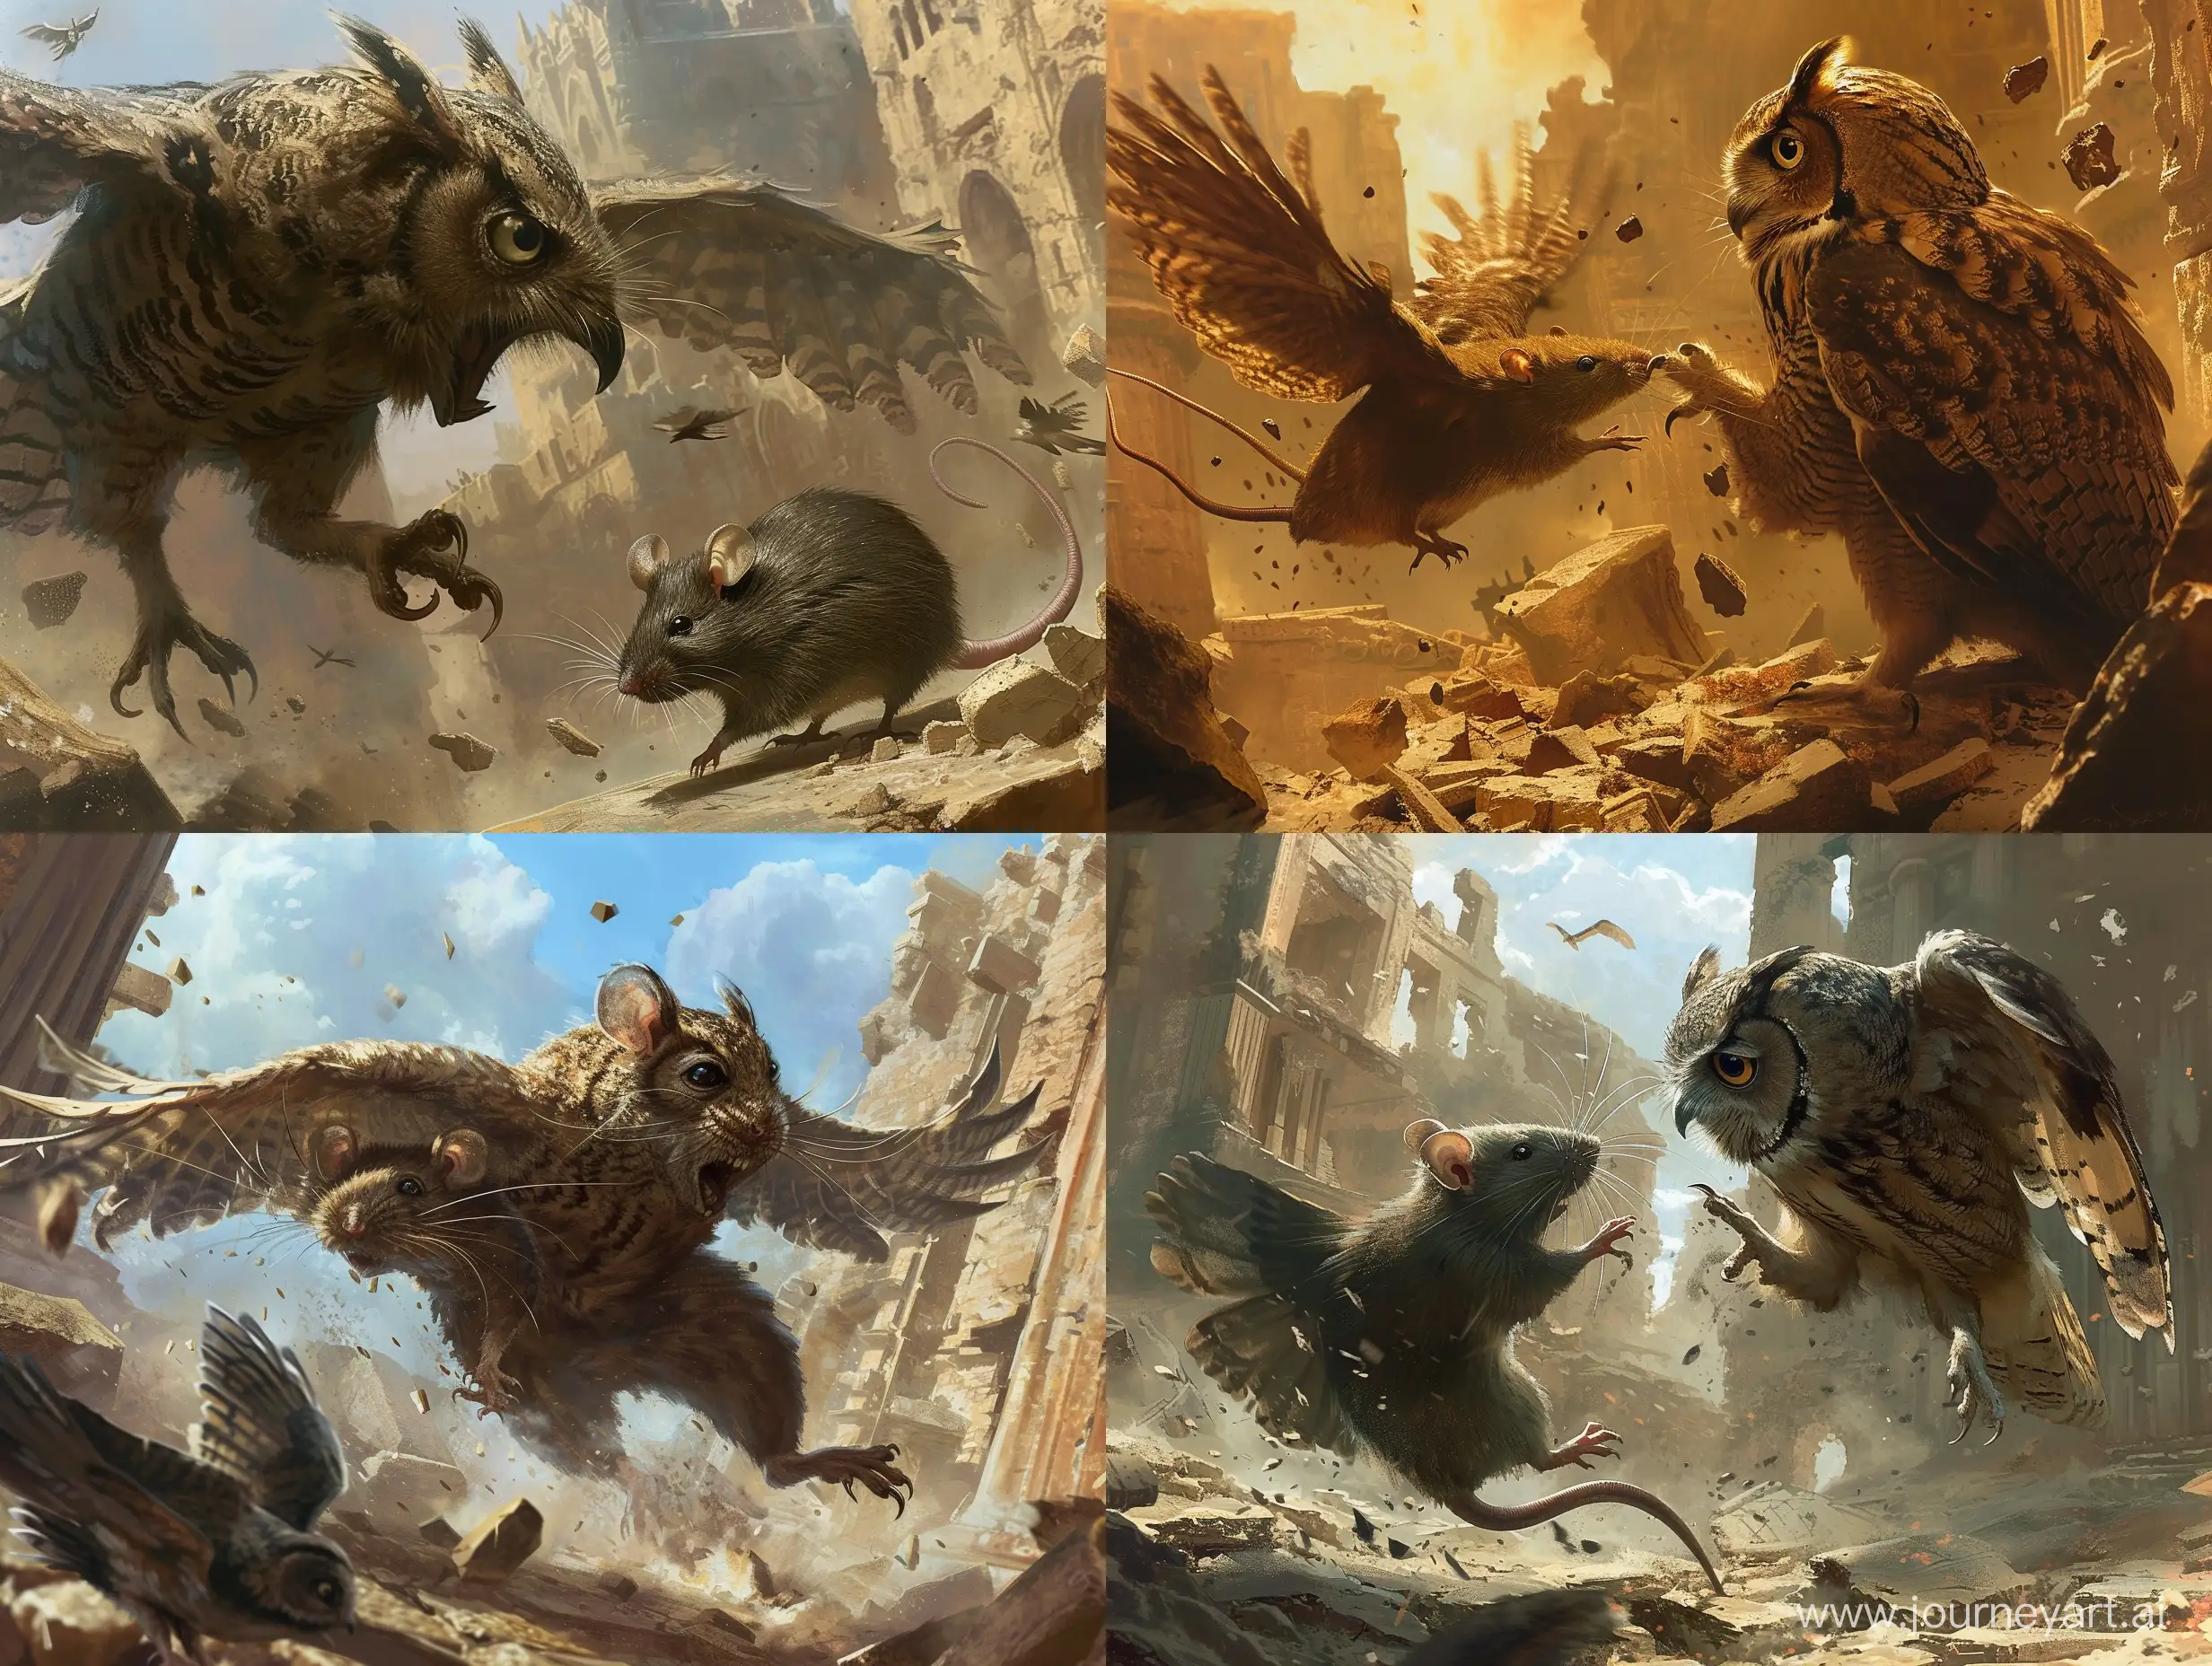 Please create an illustration in the style of dark fantasy depicting a battle-worn rat and owl still fighting amidst the ruins of an ancient city.